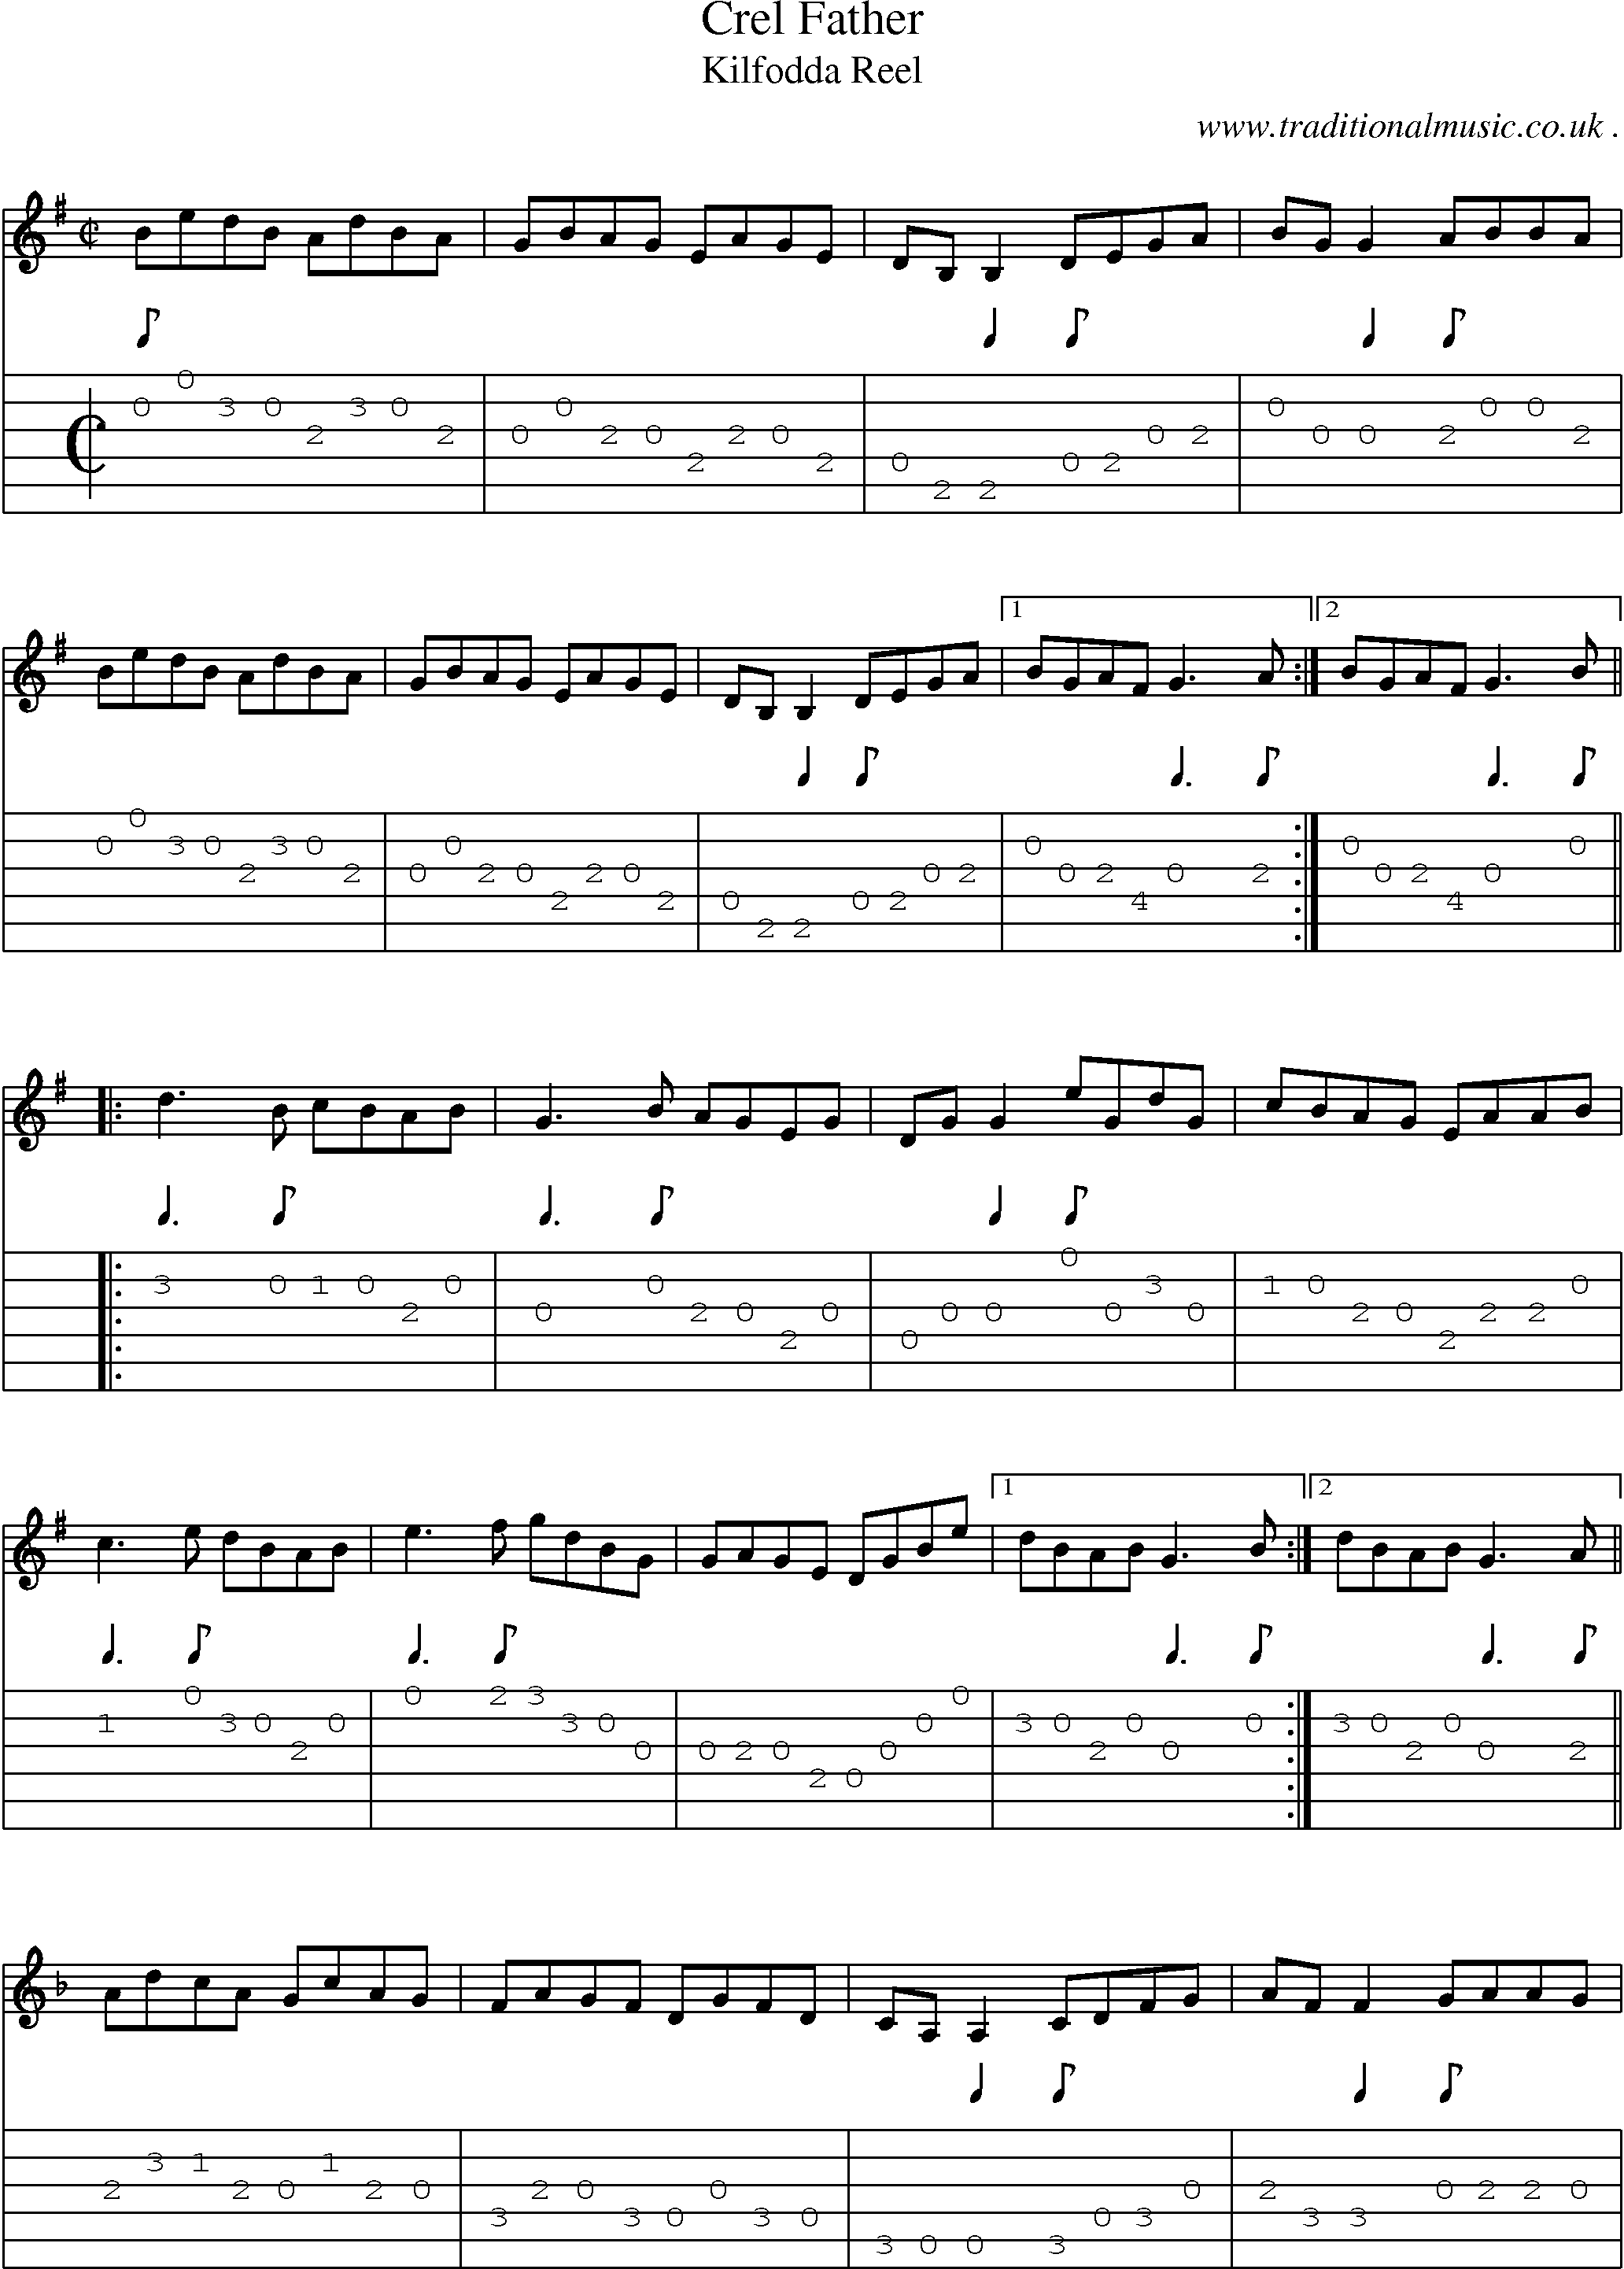 Sheet-Music and Guitar Tabs for Crel Father